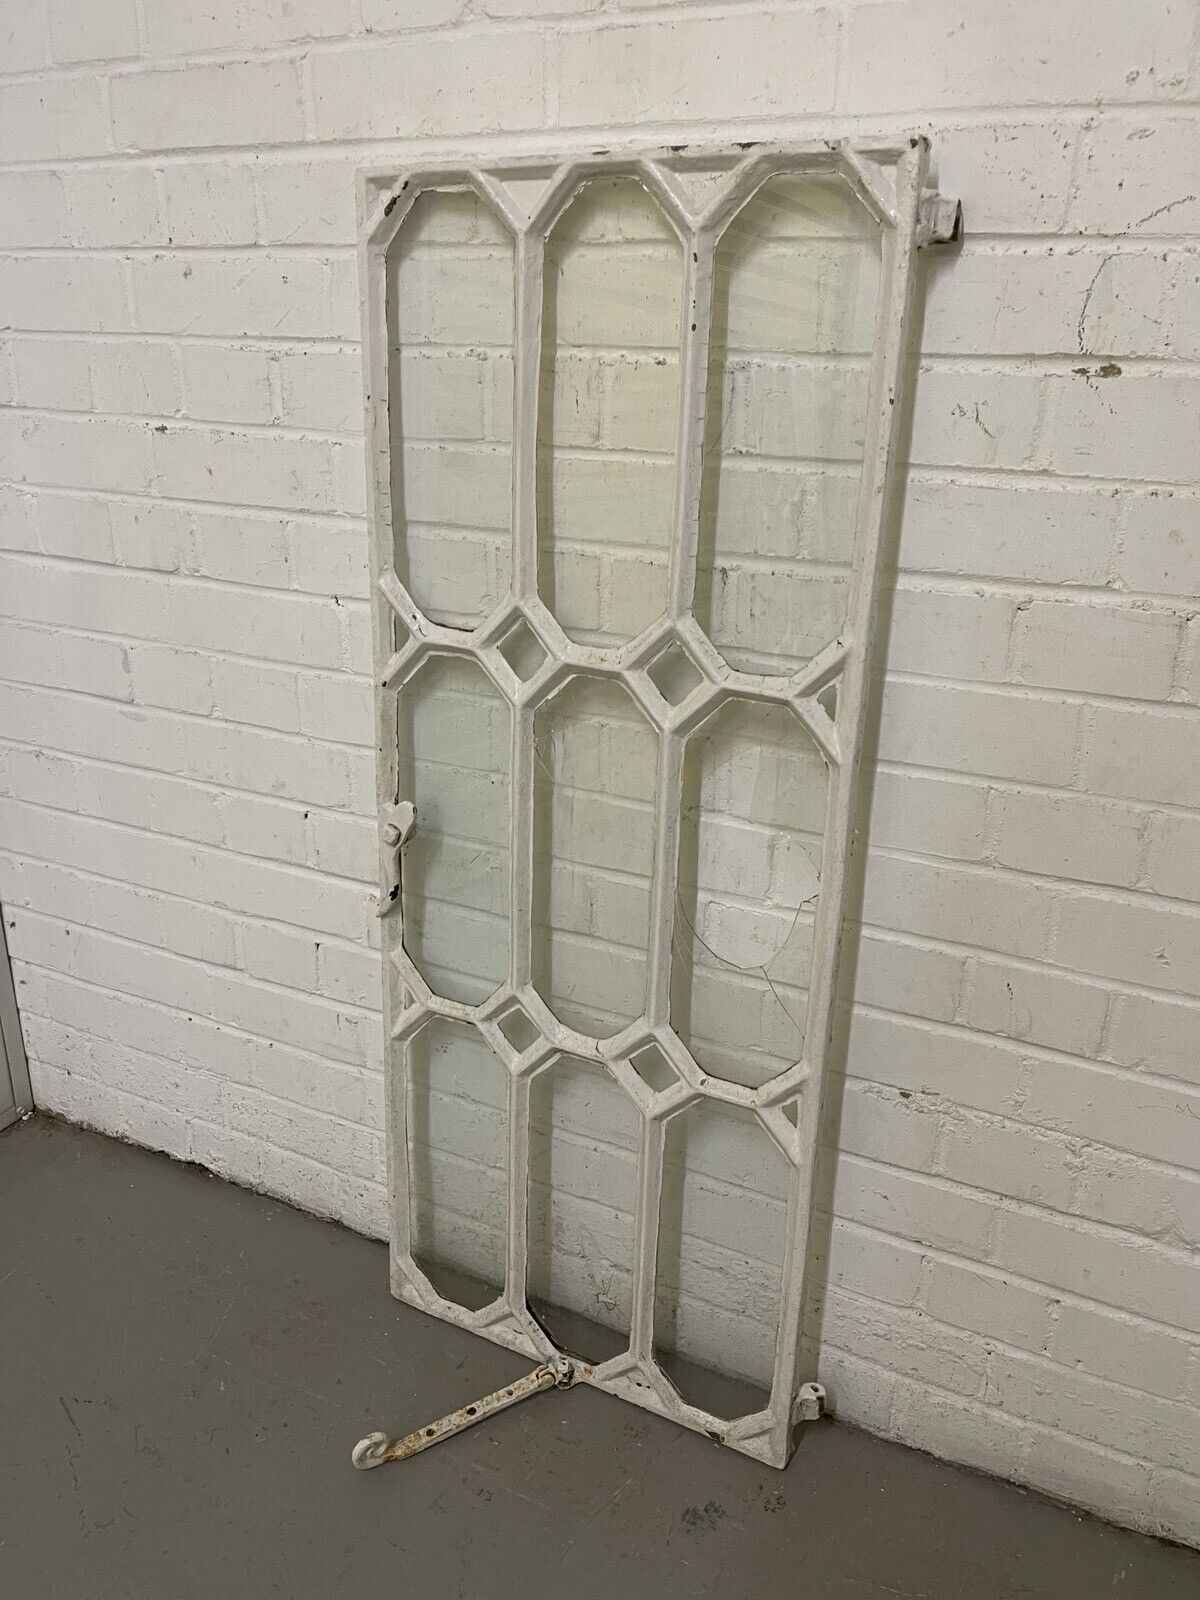 Reclaimed Art and Crafts Cast Iron Crittall Crittal Windows 1135 x 464mm